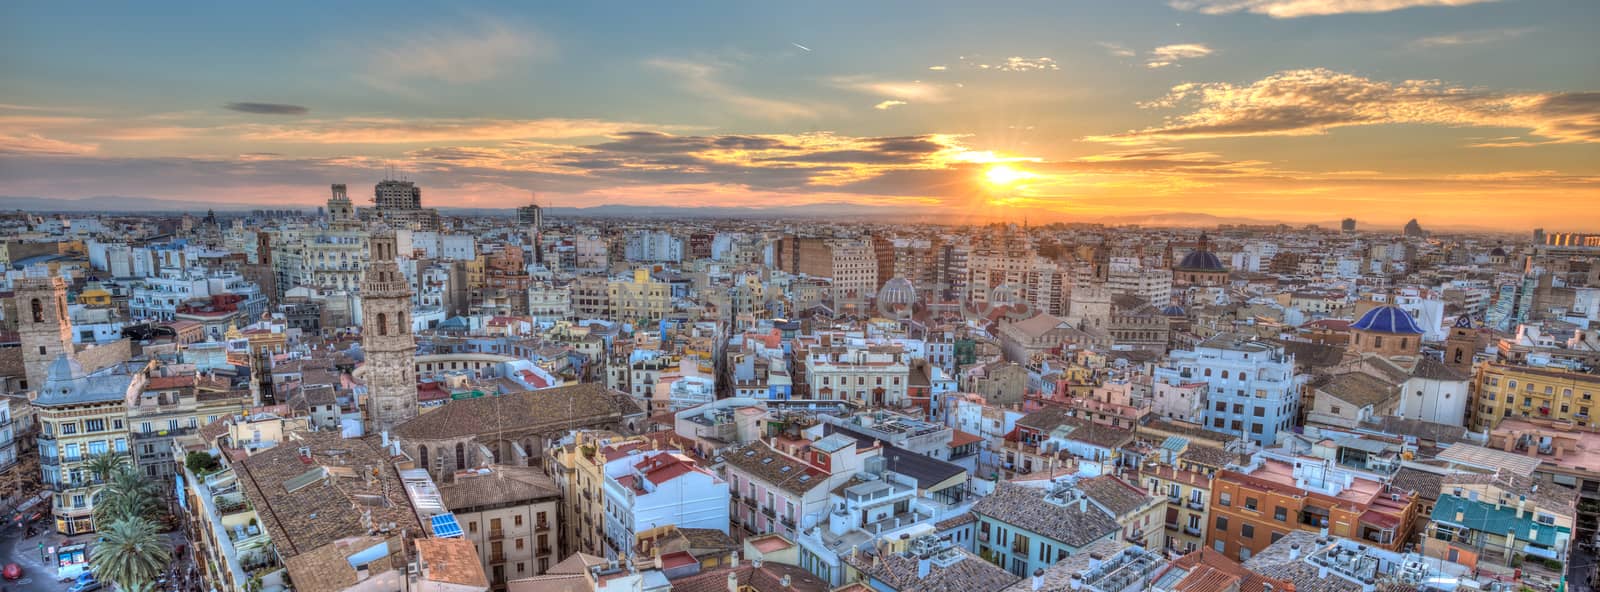 Sunset Over Historic Center of Valencia, Spain. by kasto